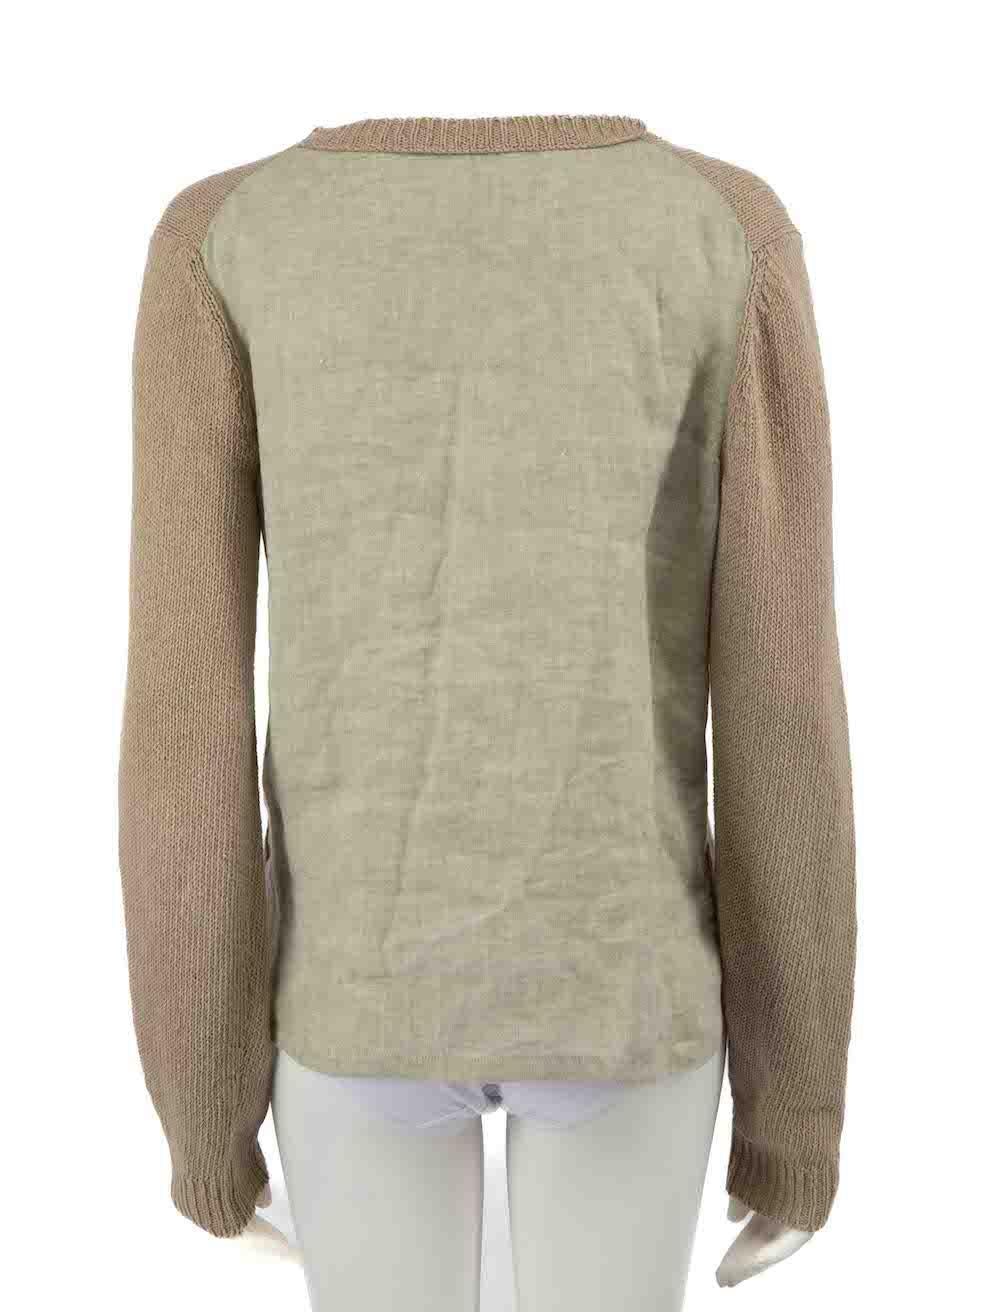 CONDITION is Very good. Hardly any visible wear to jumper is evident on this used Céline designer resale item.
 
 Details
 Beige
 Linen
 Long sleeves jumper
 Knitted
 Round neckline
 1x Front zipped chest pocket
 Back contrast linen panel
 
 
 Made